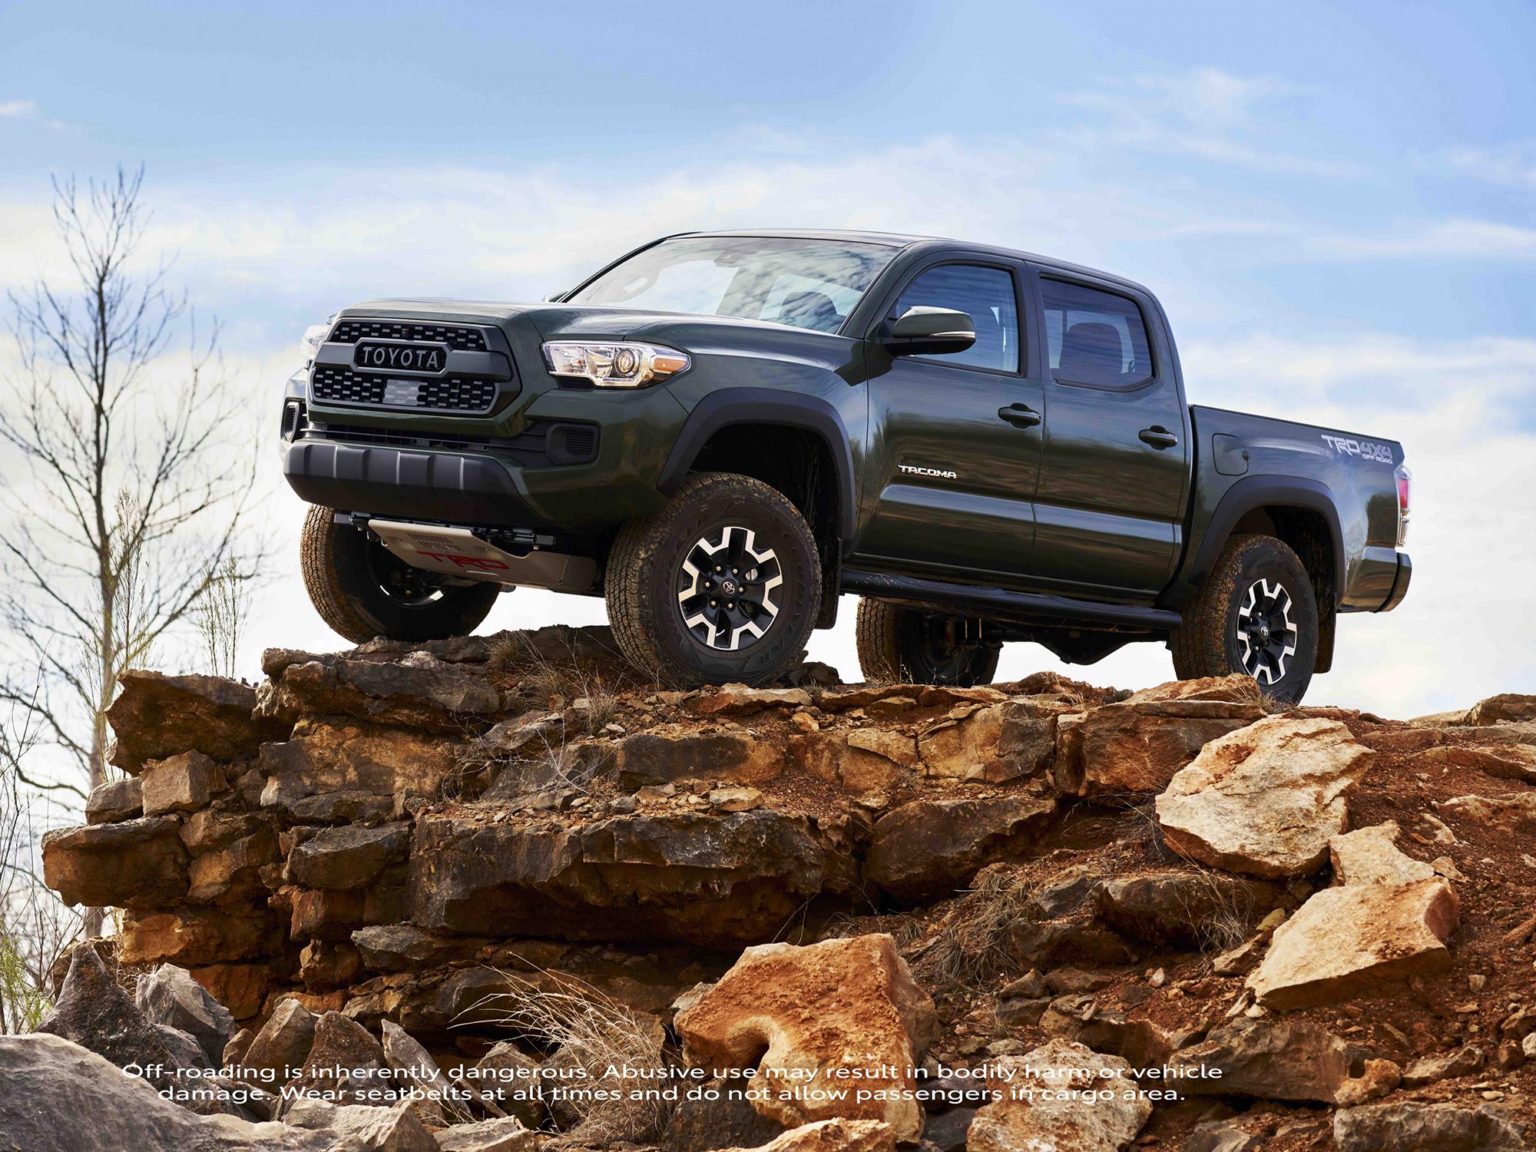 A new lift kit adds inches of ground clearance to the Tacoma.